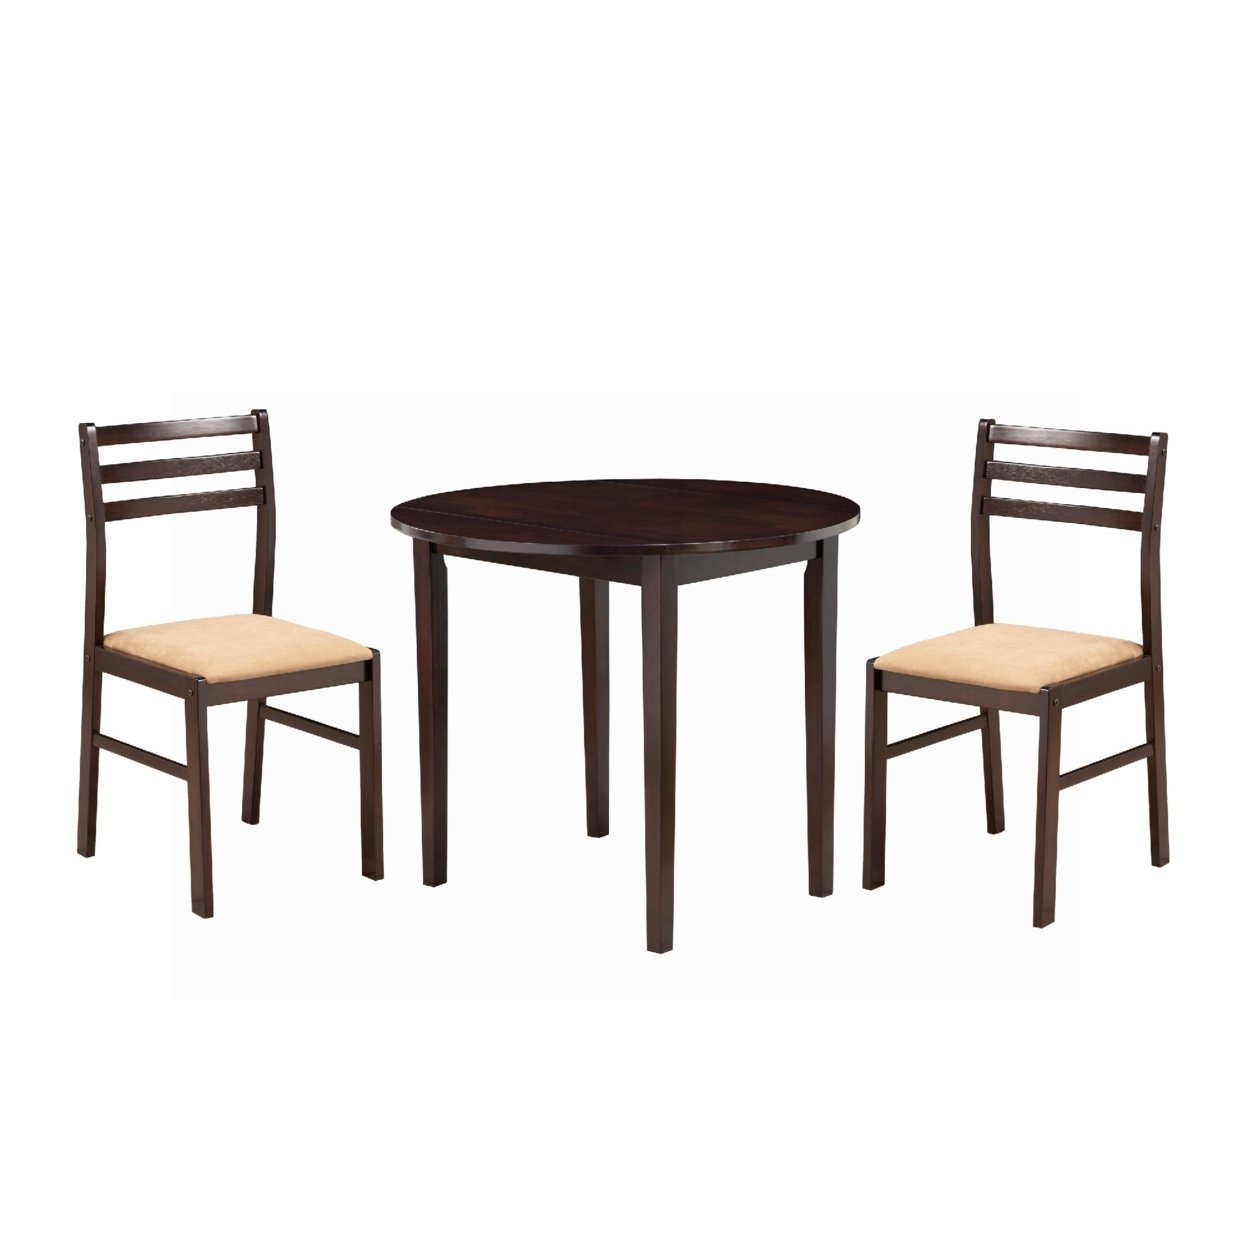 Transitional Style 3 Piece Wooden Dining Table And Chair Set, Brown- Saltoro Sherpi